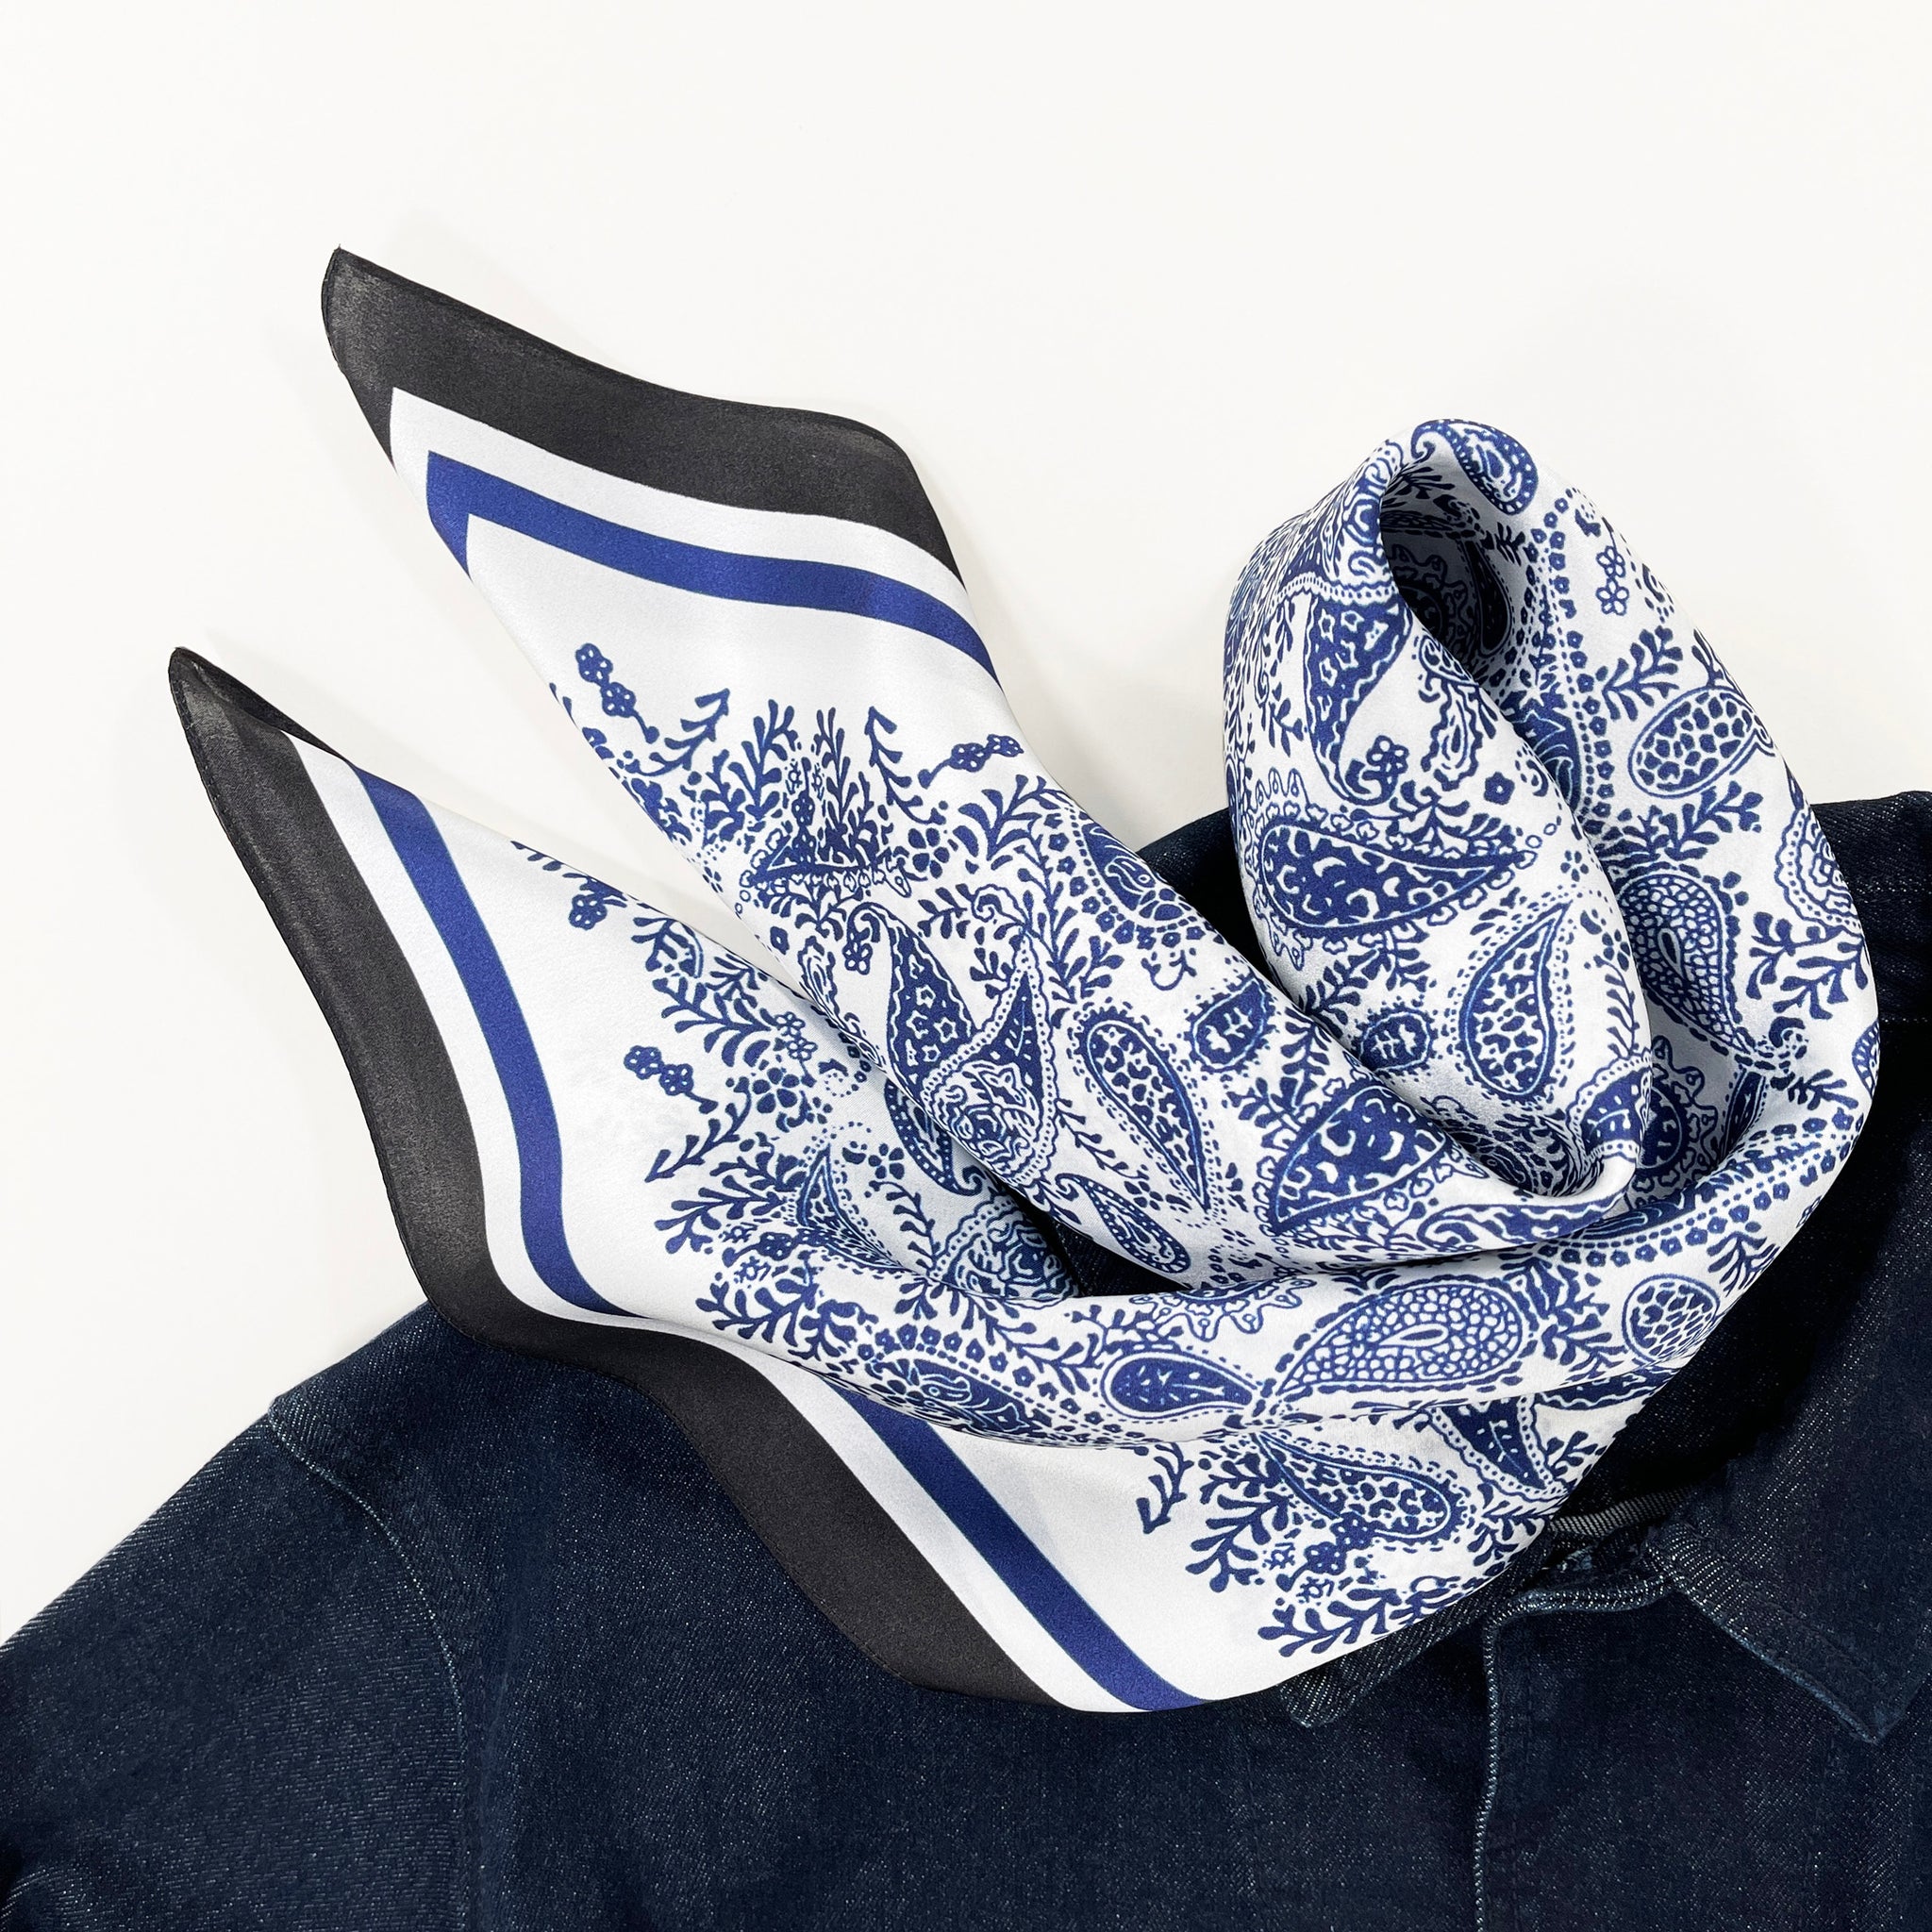 a white based silk scarf with rich blue paisley pattern print featuring black edge laying on a deep blue men's denim jacket